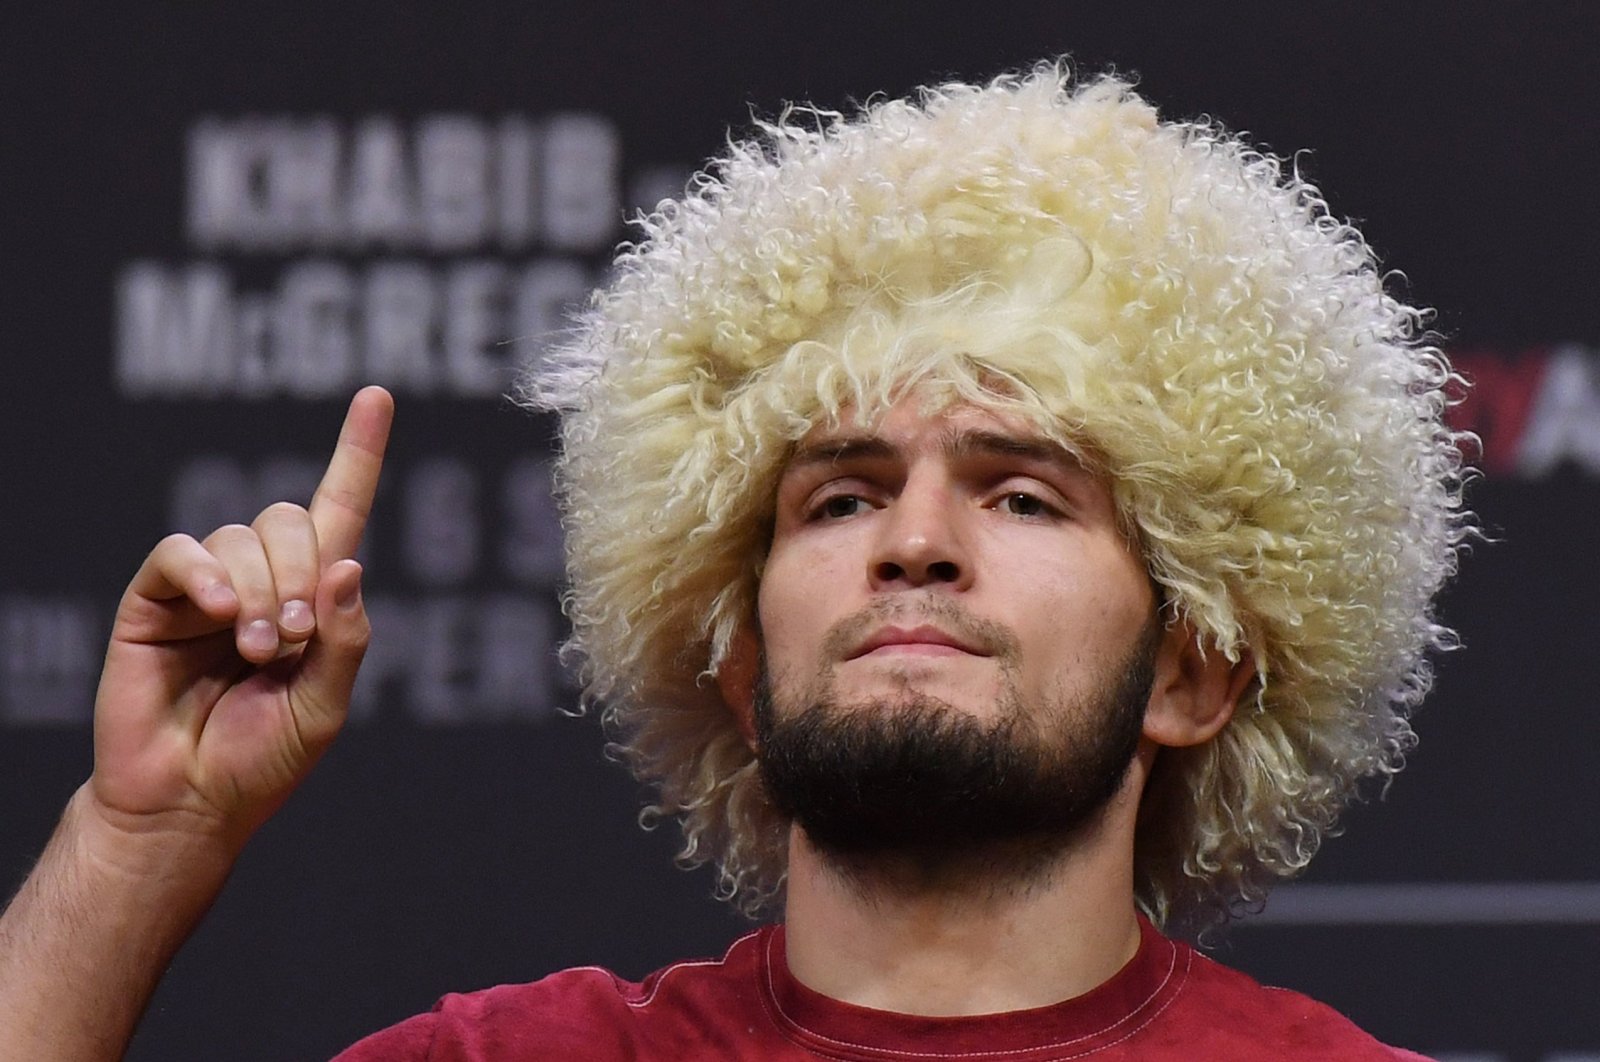 UFC lightweight champion Khabib Nurmagomedov poses during a ceremonial weigh-in for UFC 229 at T-Mobile Arena in Las Vegas, Nevada, Oct. 5, 2018. (AFP Photo)